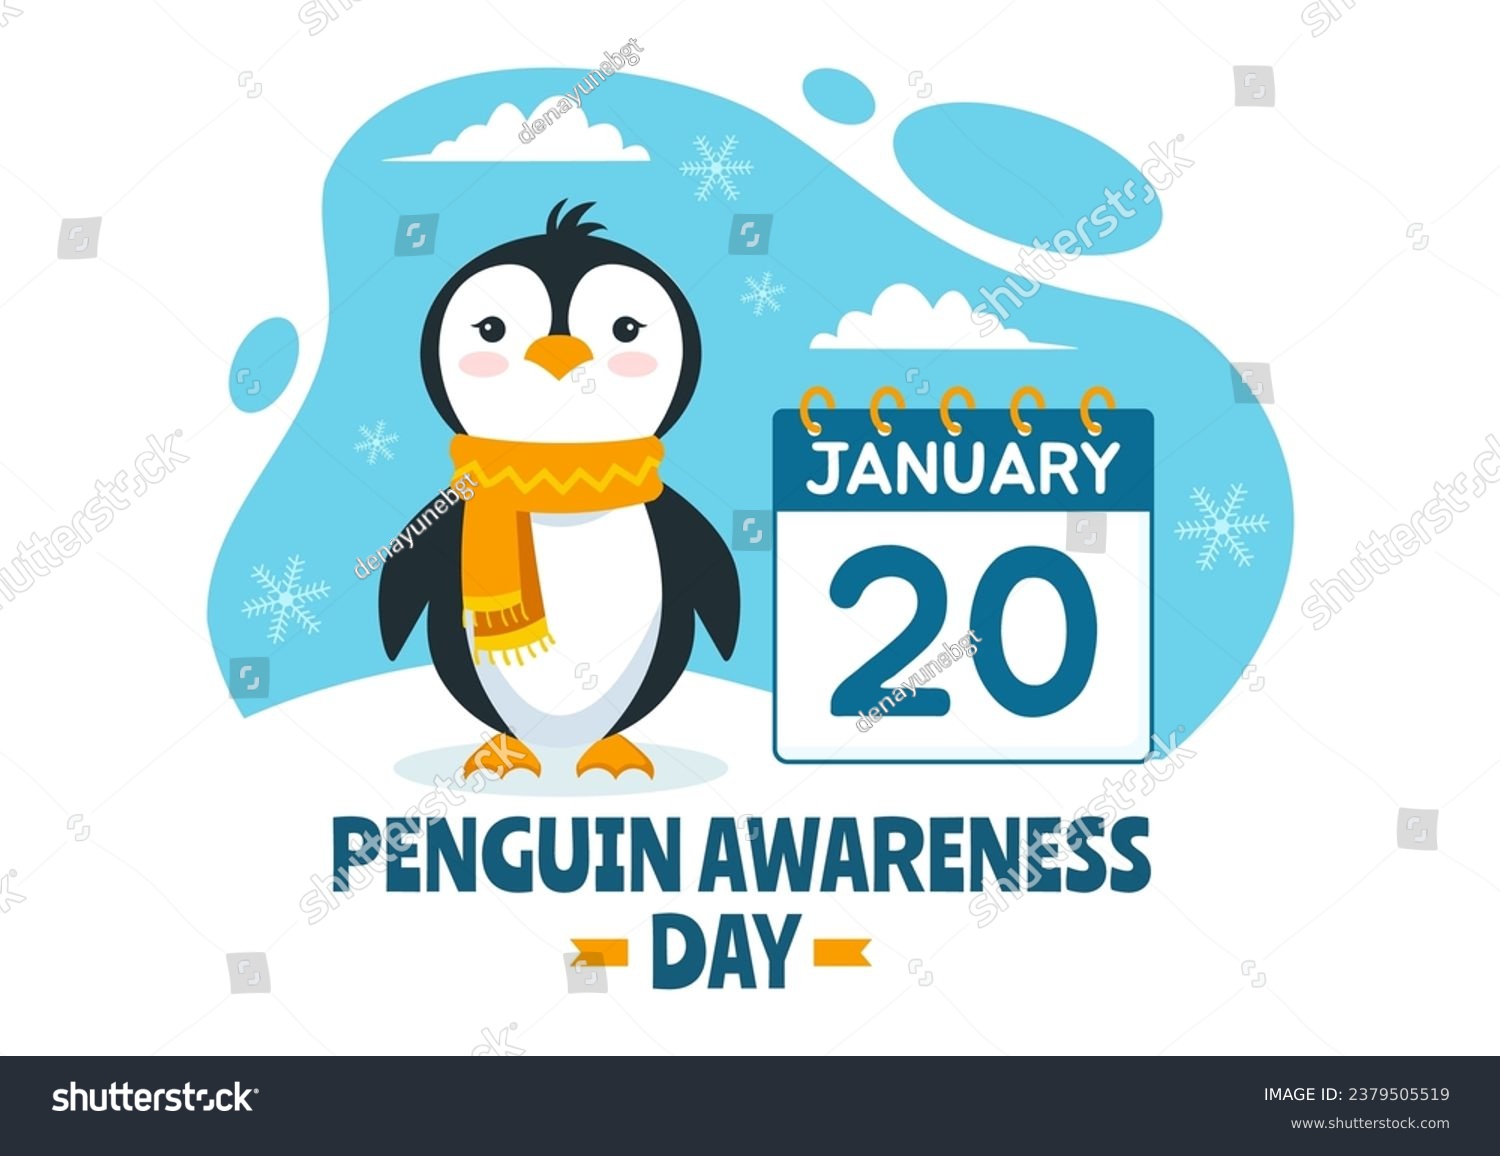 SVG of Penguin Awareness Day Vector Illustration on 20 January with Penguins and Iceberg to Conserve Animals in Flat Cartoon Background Design svg